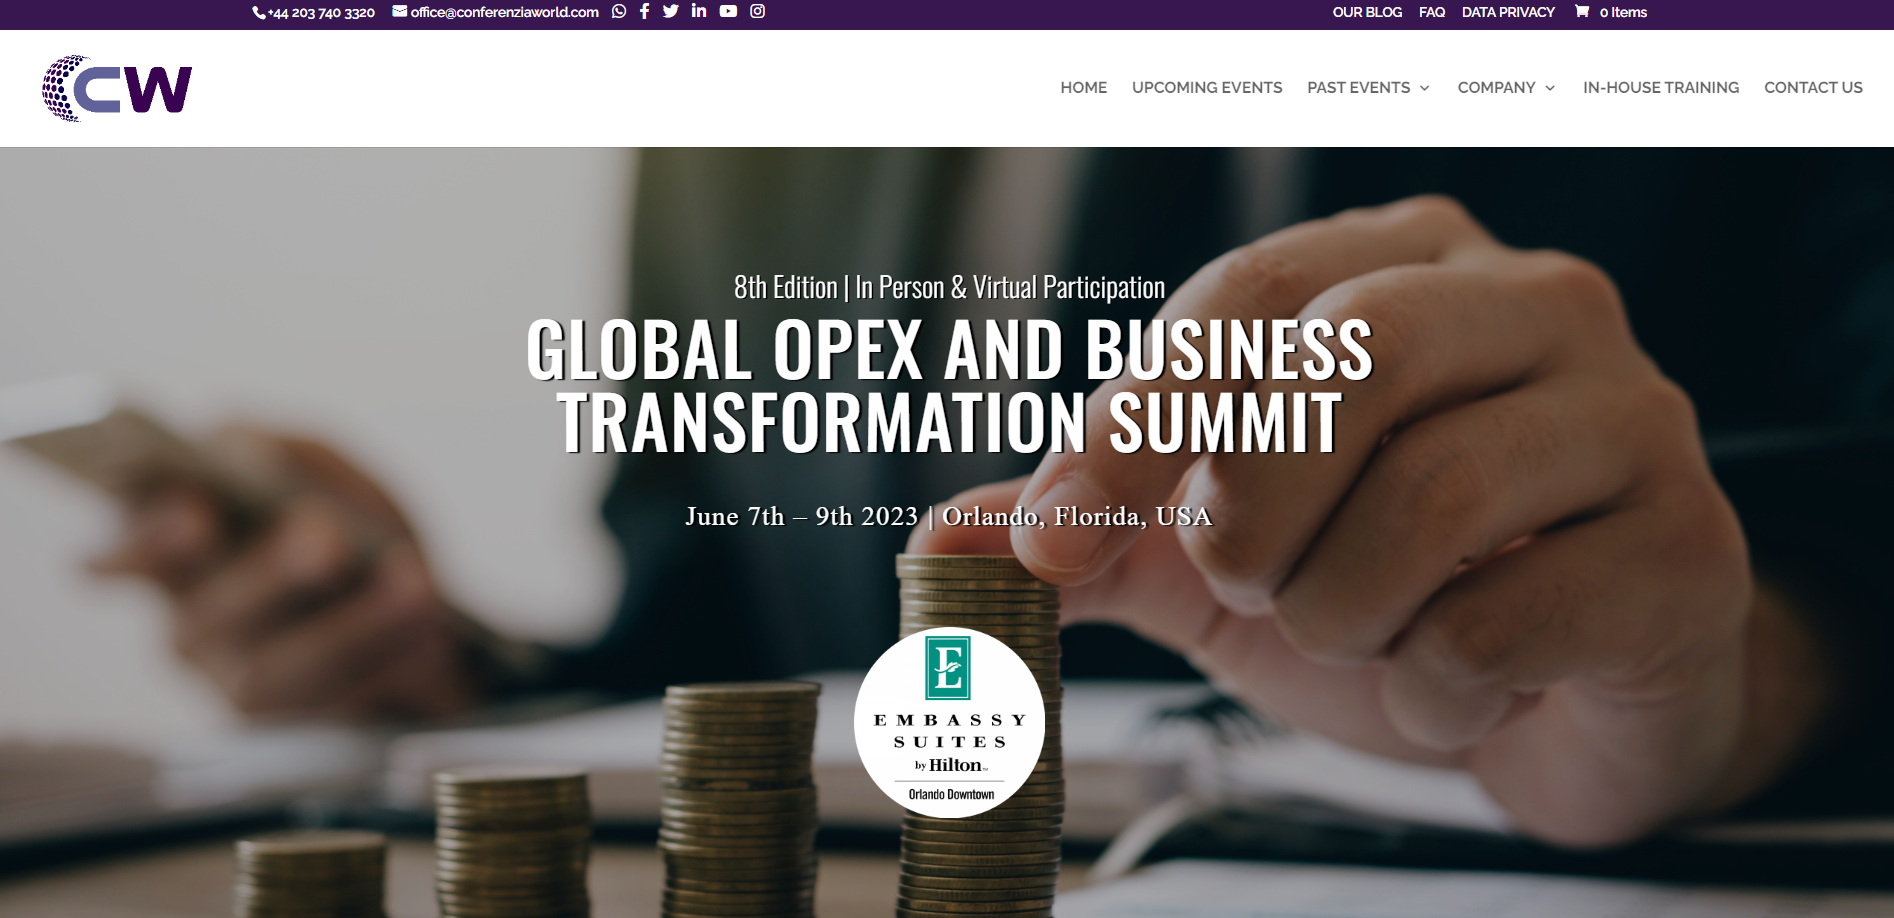 GLOBAL OPEX AND BUSINESS TRANSFORMATION SUMMIT